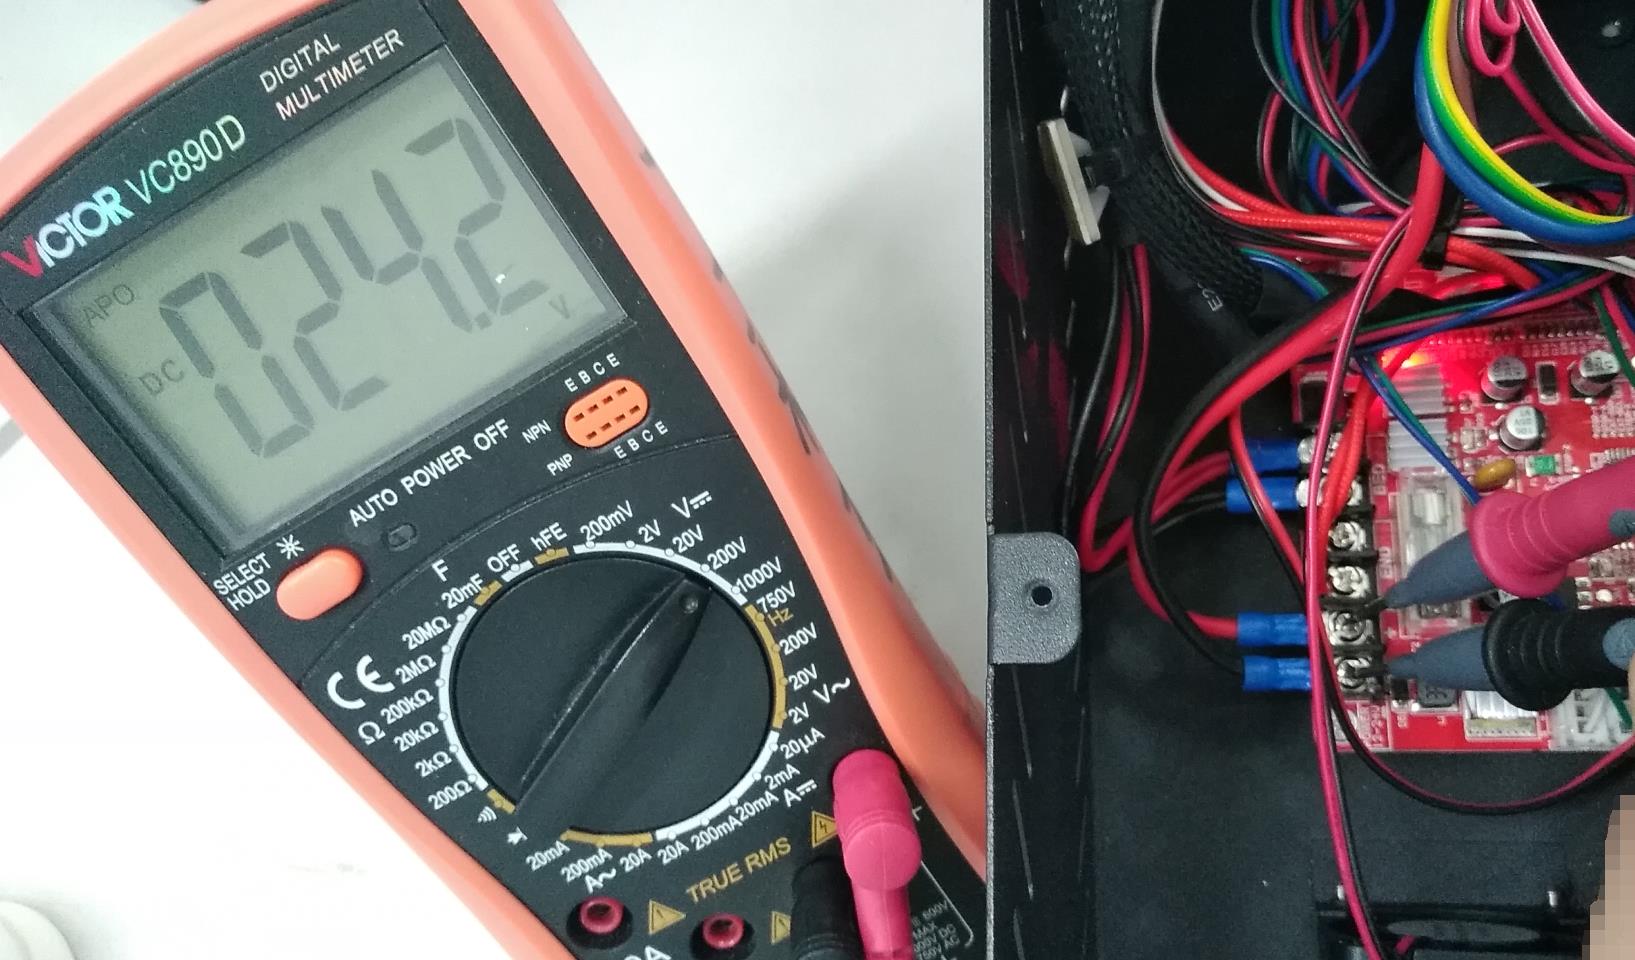 measure input voltage on the mainboard